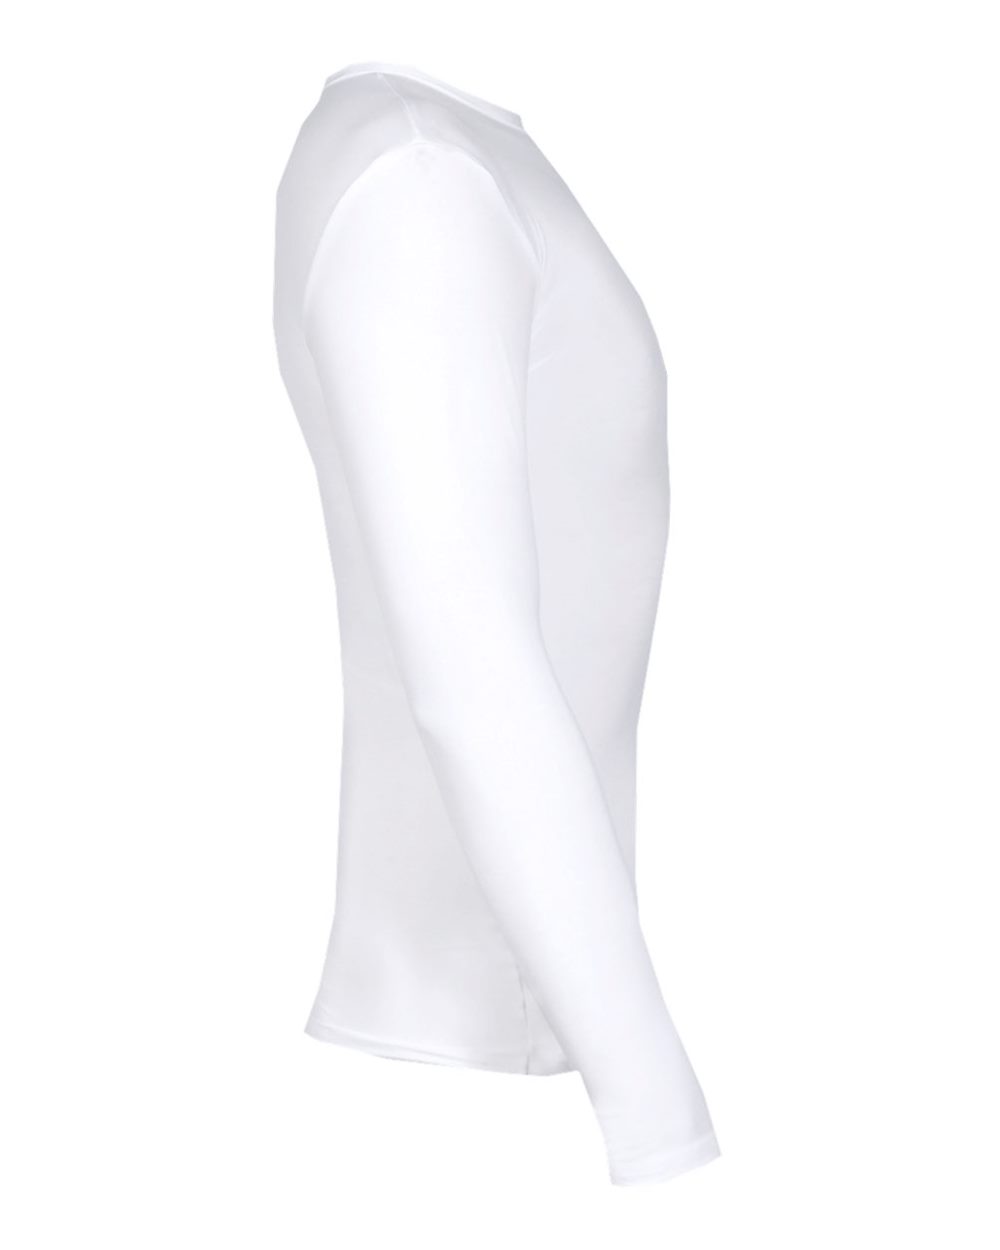 Pro Compression long sleeve sports Youth Badger 2605